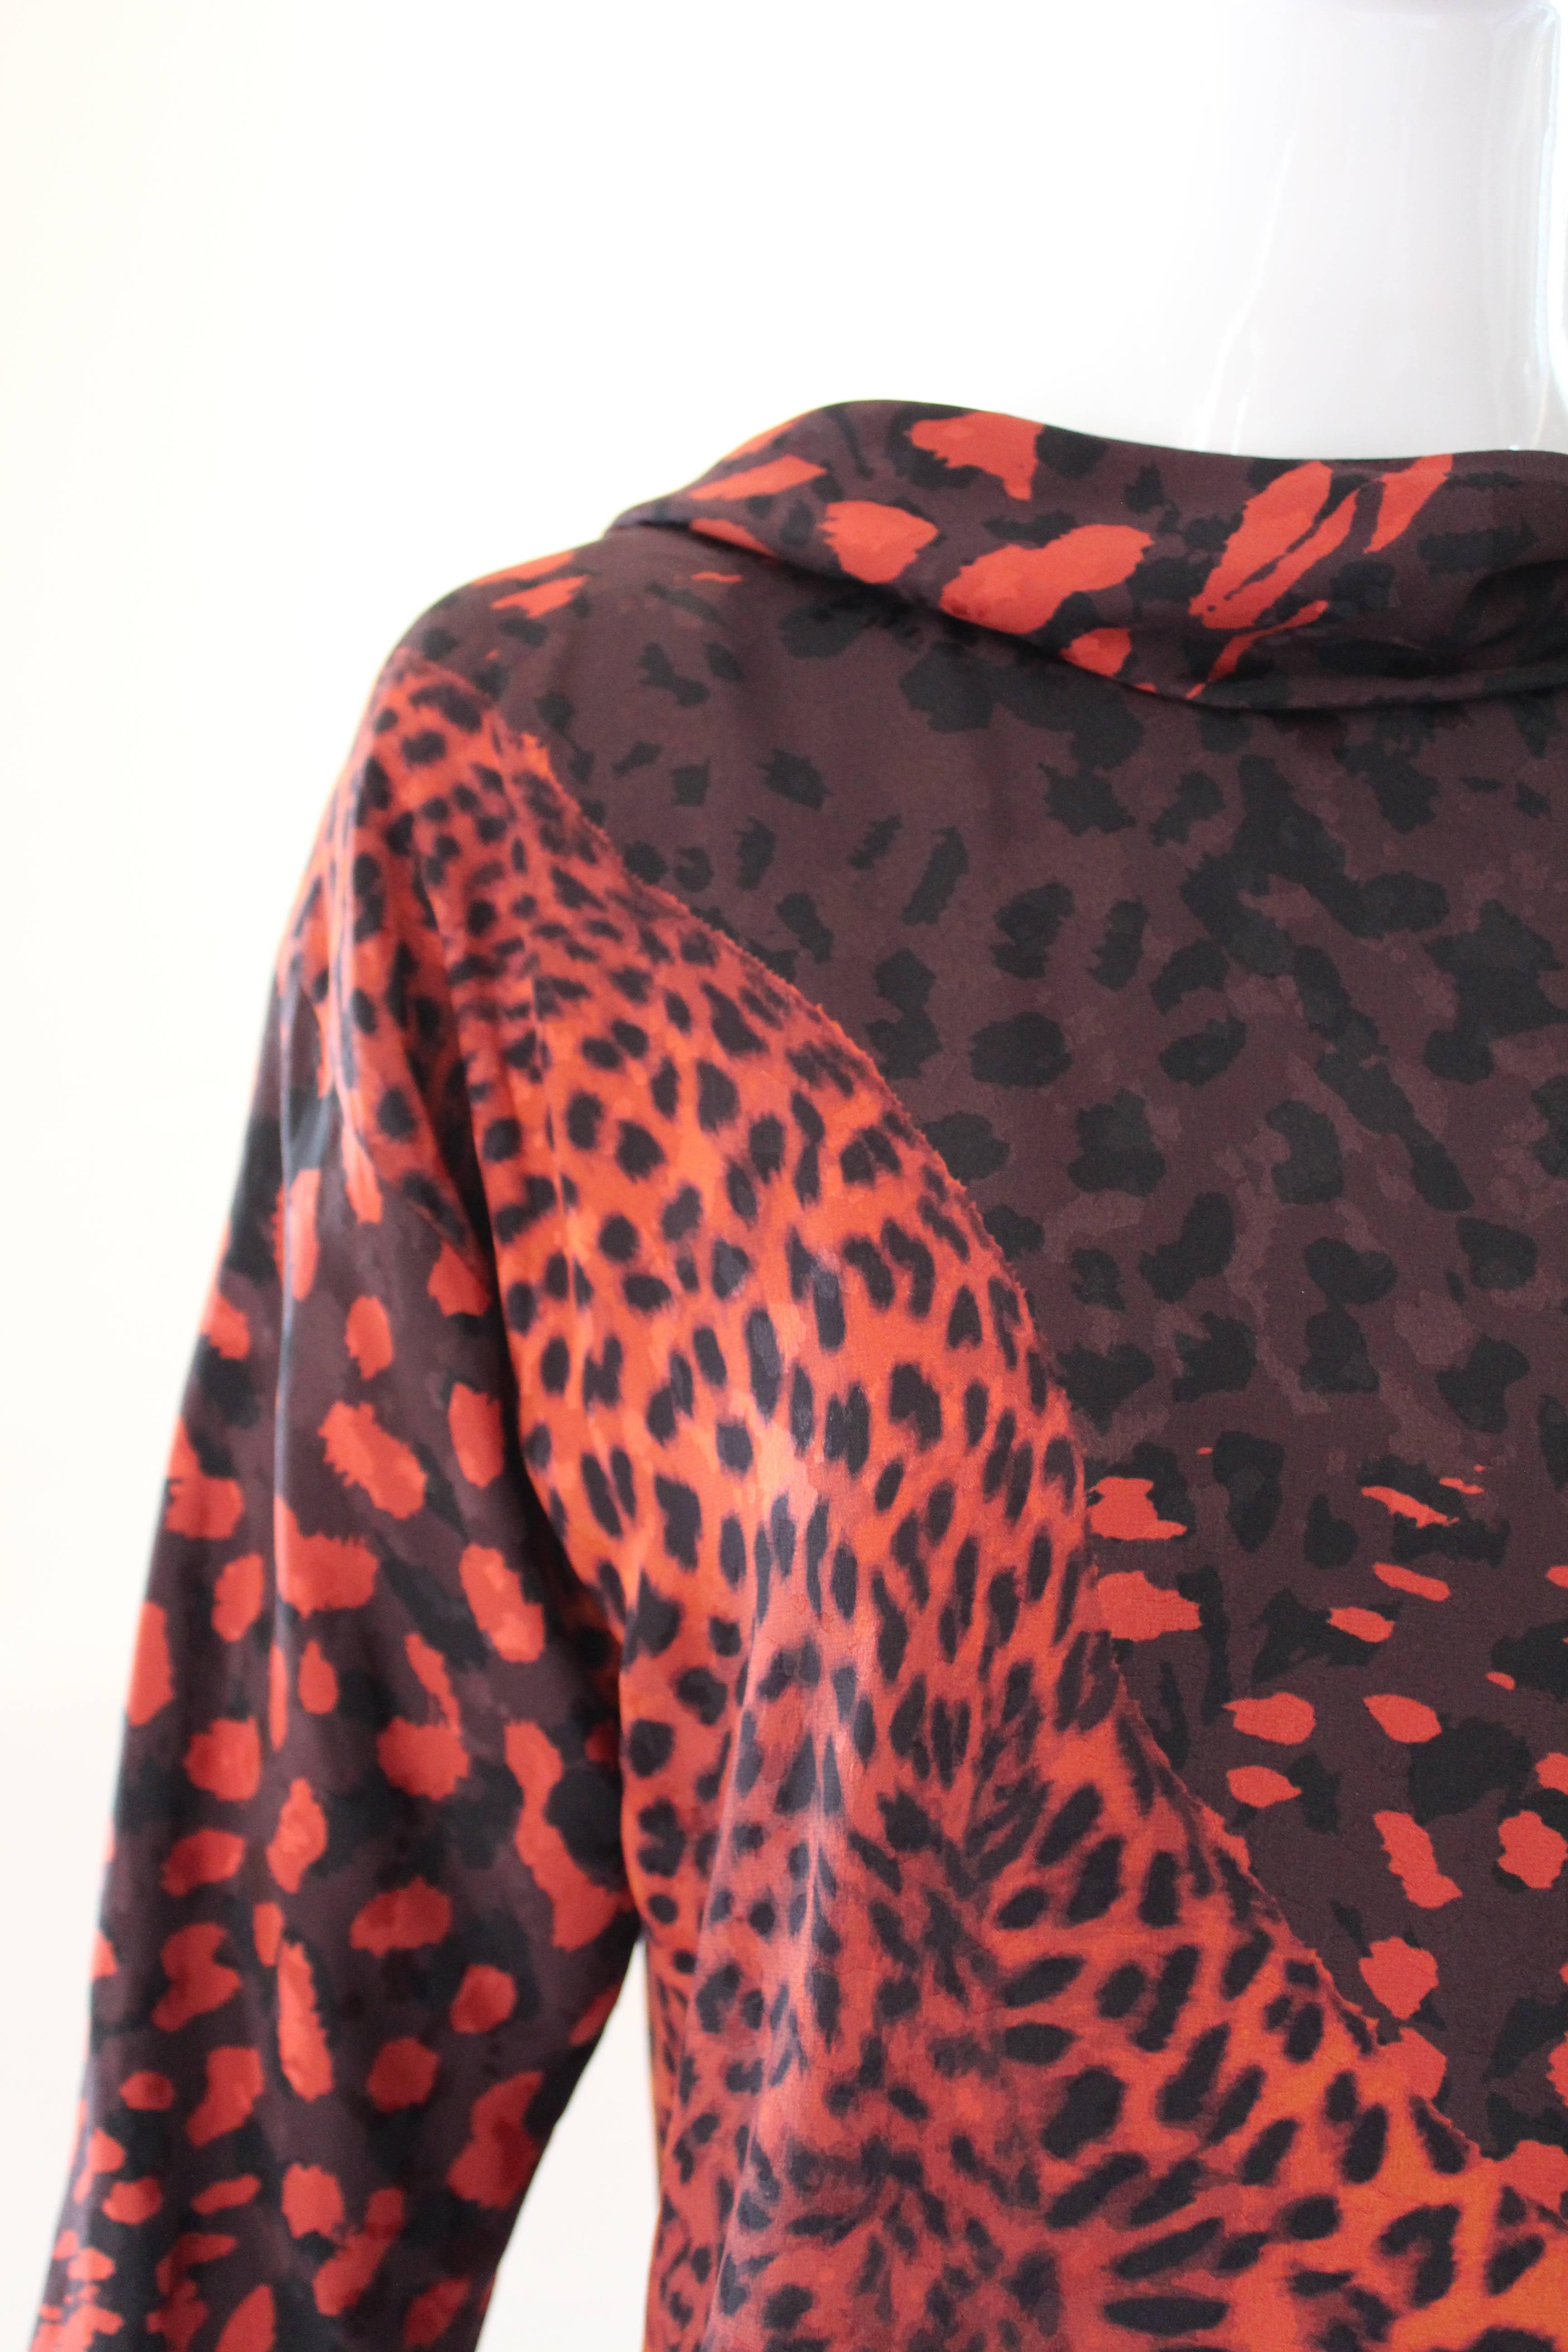 Amazing leopard print silk dress with tiger face on front and back. Fashioned from shades of brick red, orange, brown and black silk and entirely lined.  The lovely draped neckline drops down lower in the back.  Hemline is gathered in the back with